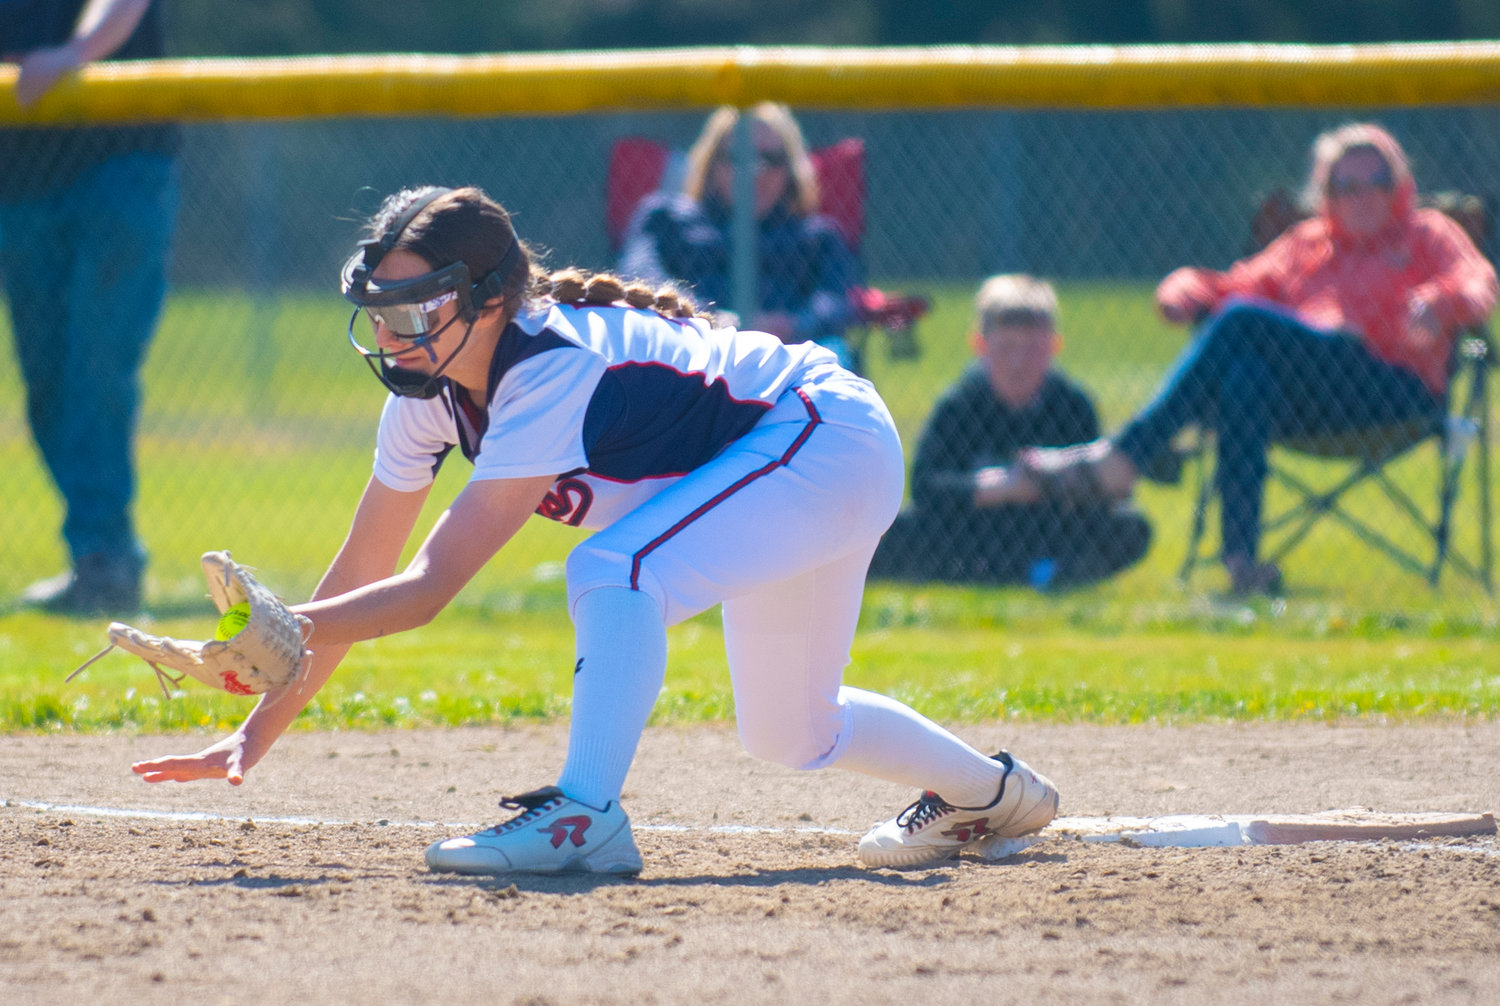 PWV first baseman Dani Shannon stretches to make an out for the Titans on Tuesday.